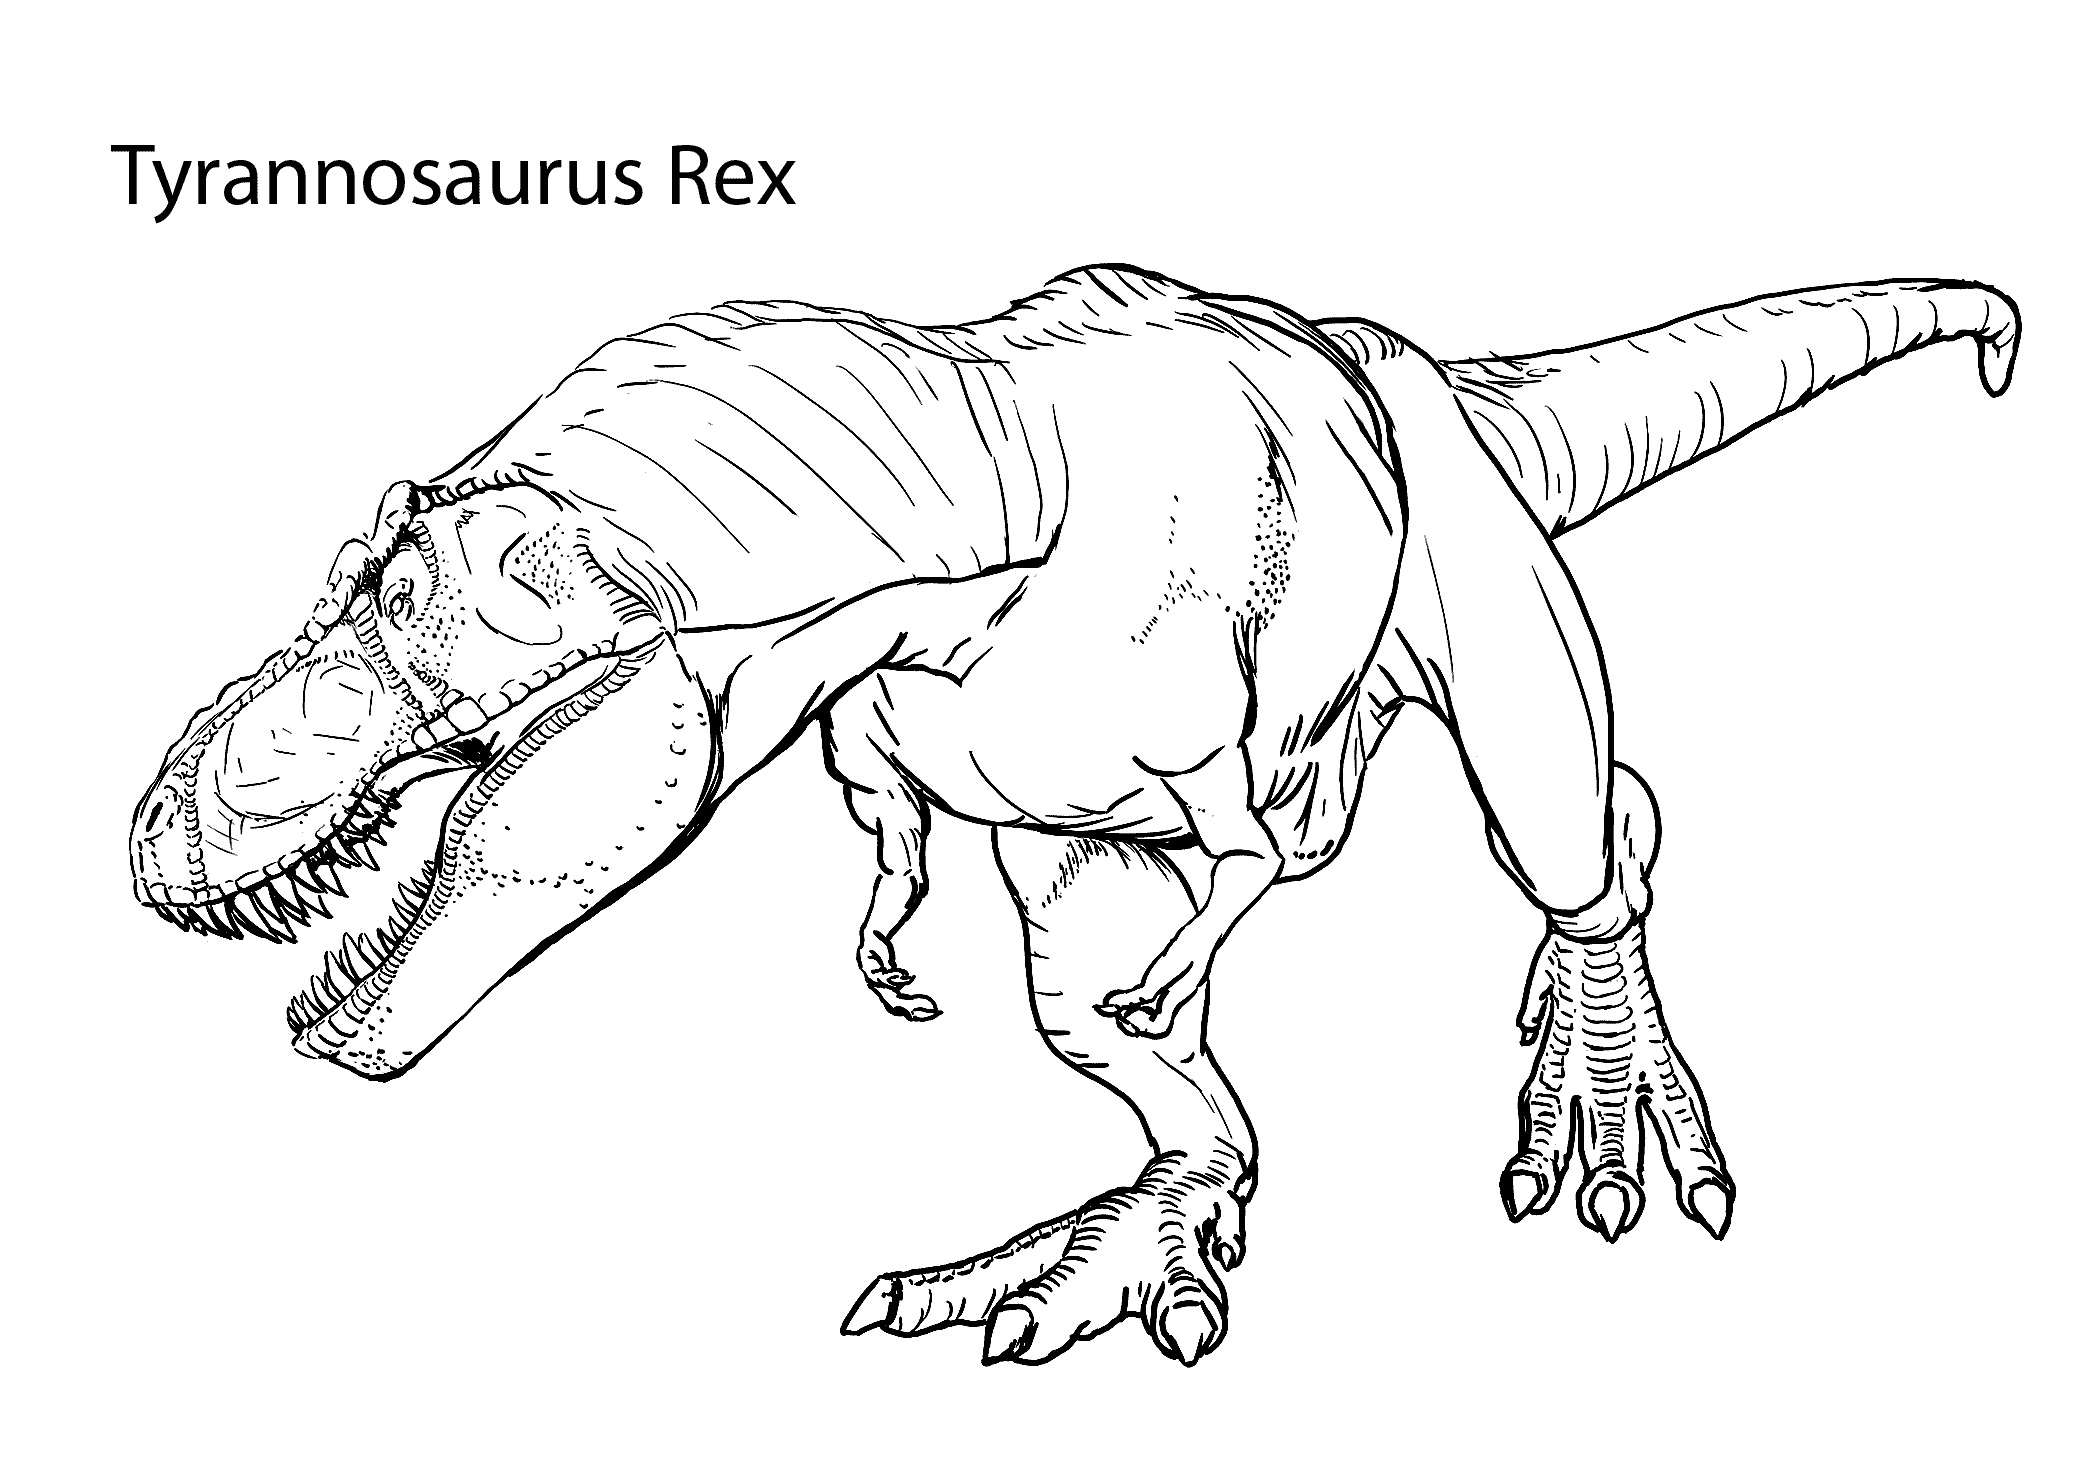 Tyrannosaurus Rex Coloring Pages   Dinosaurs Coloring Pages ...